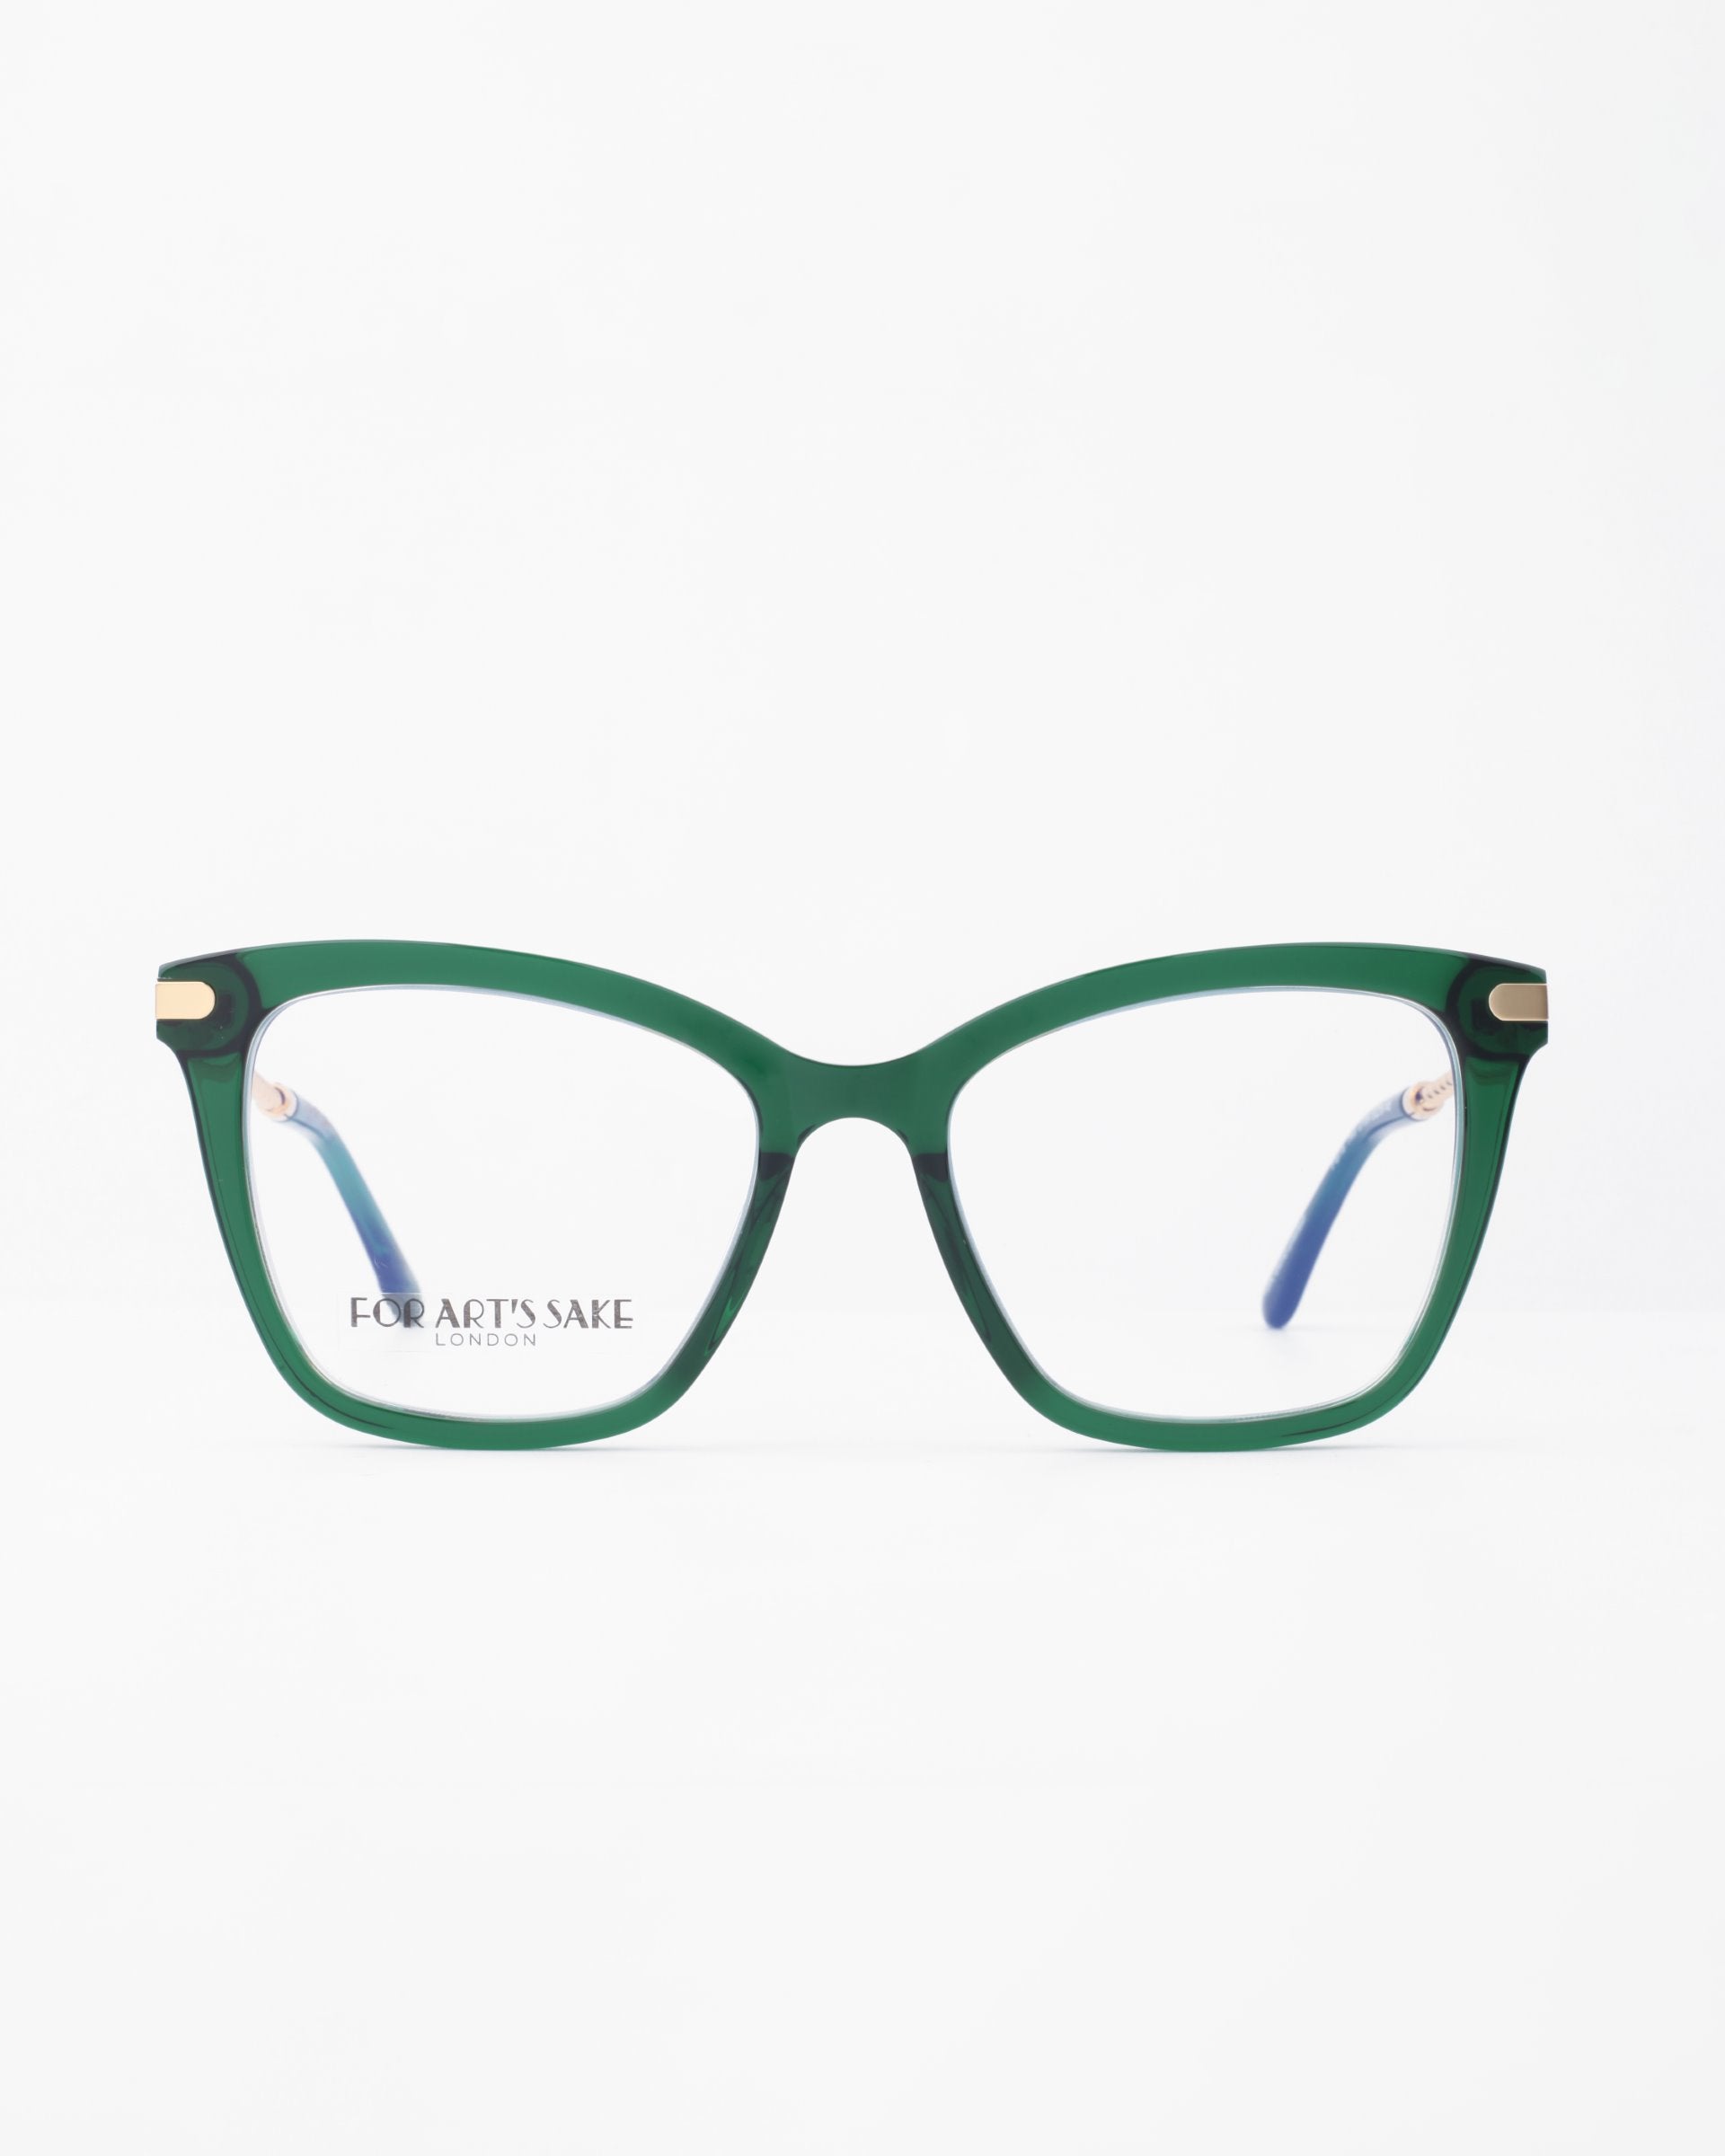 A pair of green-rimmed Paris Two eyeglasses by For Art&#39;s Sake® displayed against a plain white background. The glasses have a square frame with blue temple tips and feature a blue light filter for added protection.